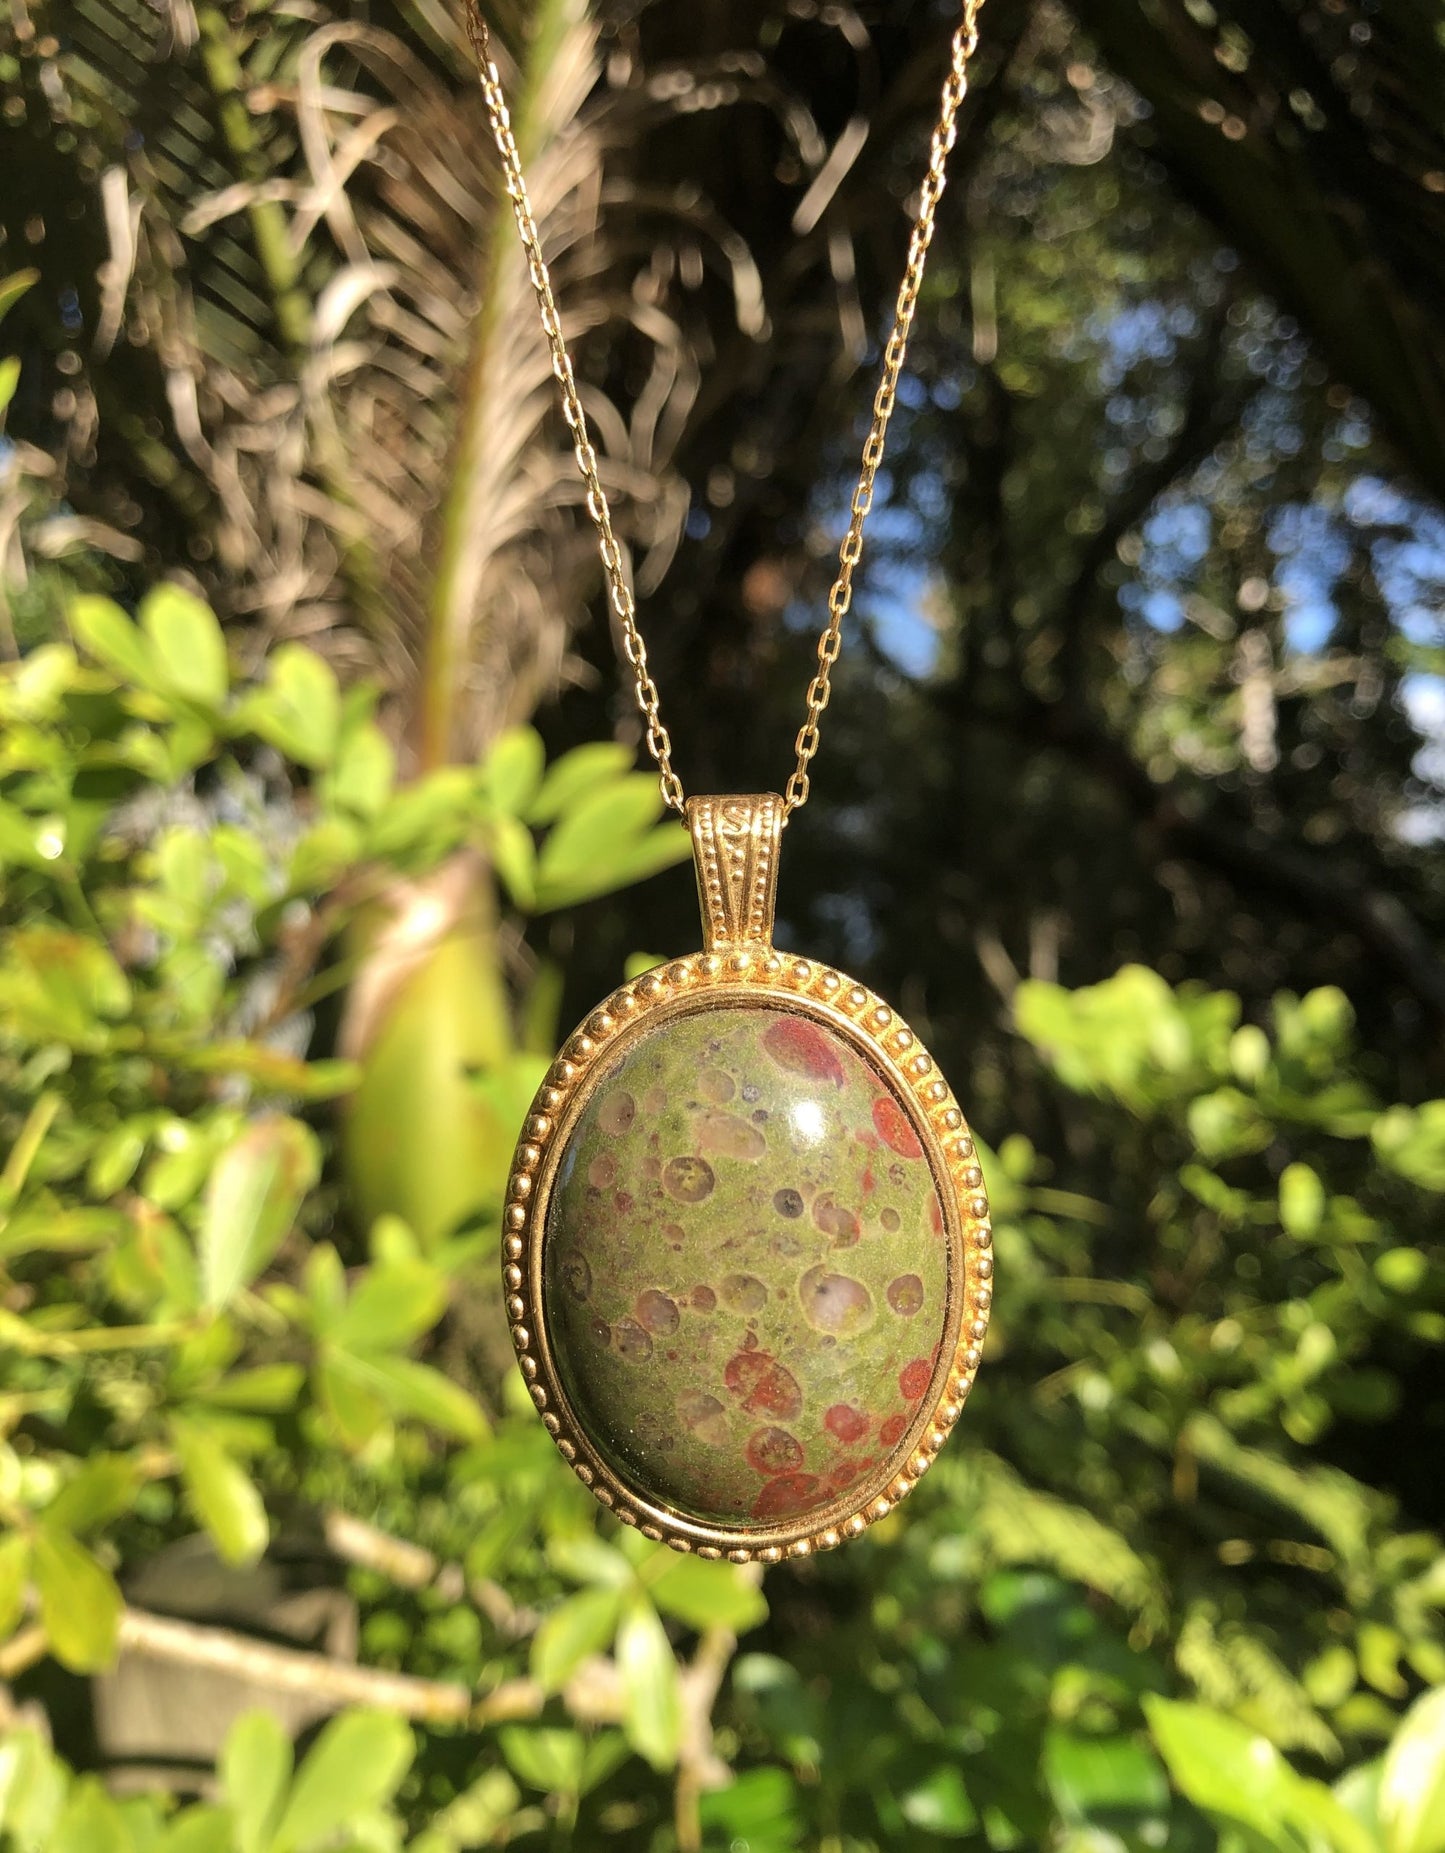 Necklace with rare New Zealand reverse poppy jasper with red poppy dots on a background of green jasper, hand polished into a 40x30mm cabochon and set into a gold plated setting with 19 inch chain - on leafy background